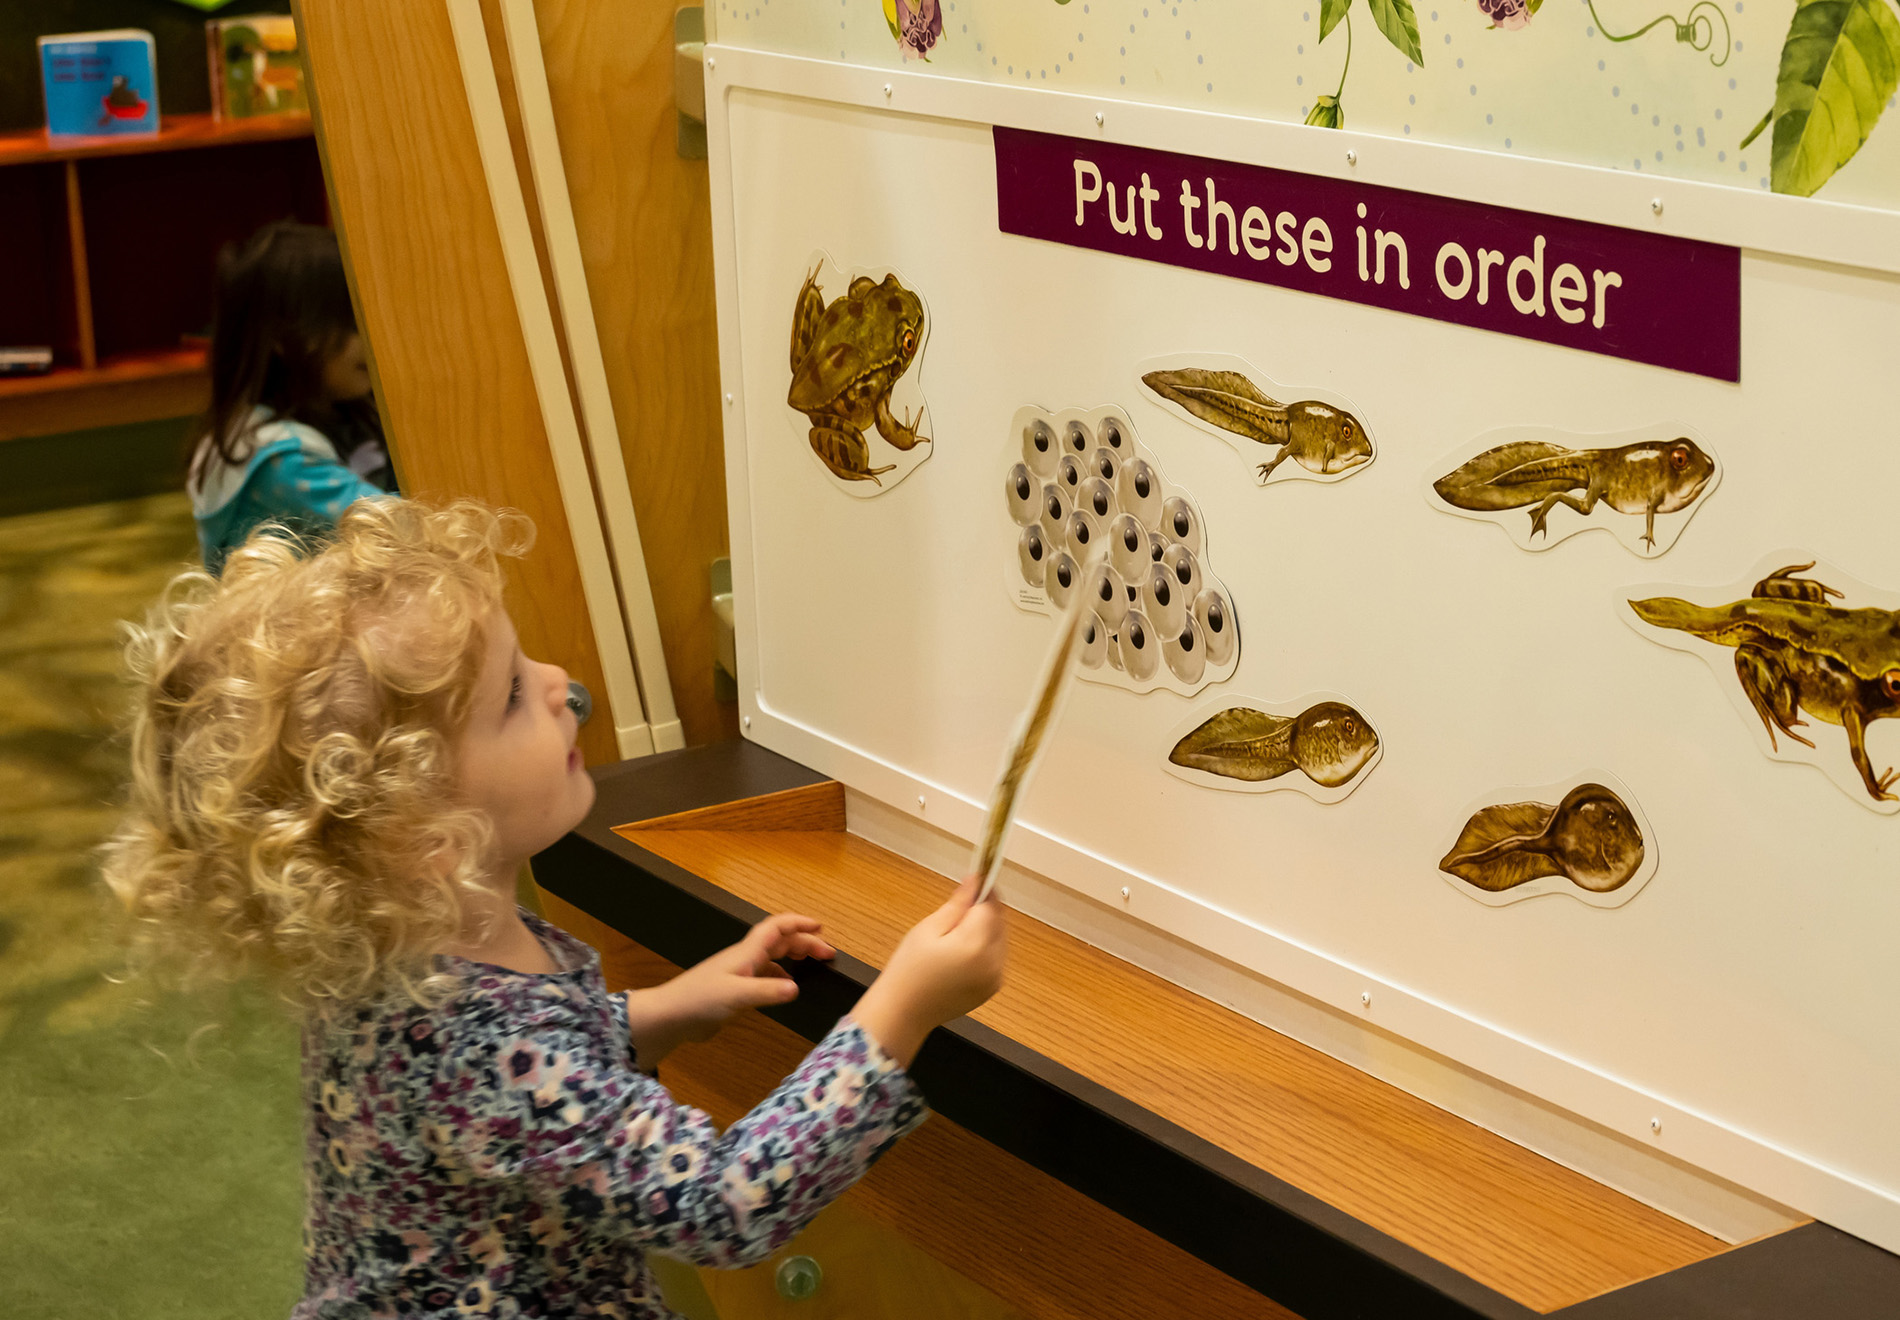 young child holding a pointing stick and standing in front of a white board. The child is looking up at a series of images showing the stages of a frogs life